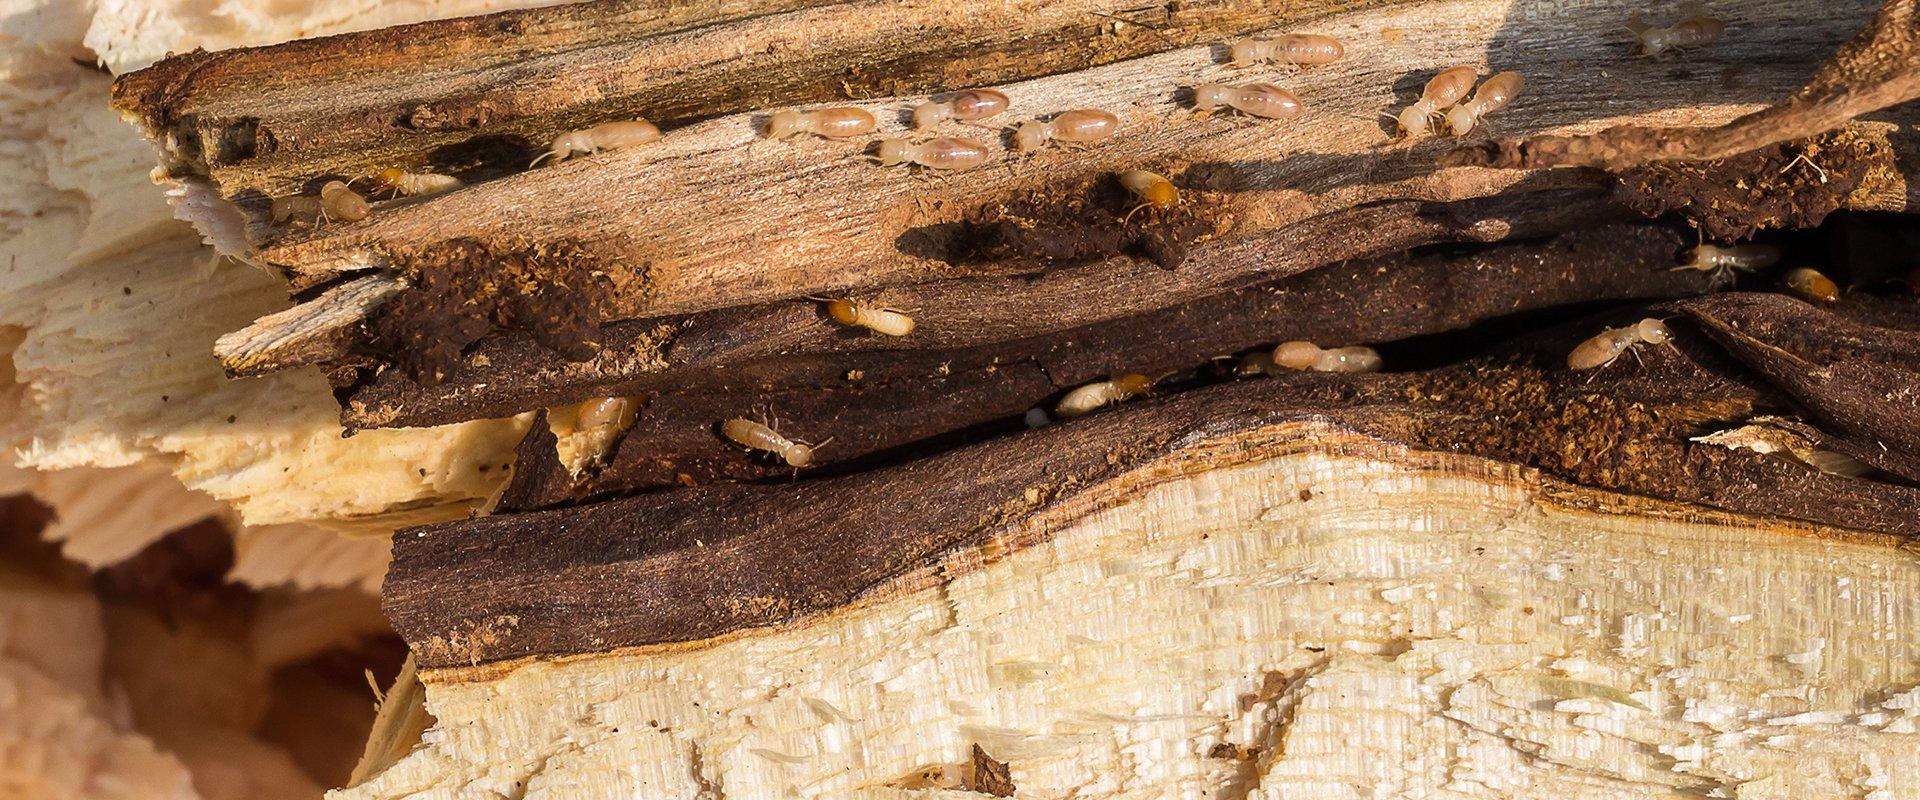 a termite infestation on a wooden structure outside of a home in fort worth texas